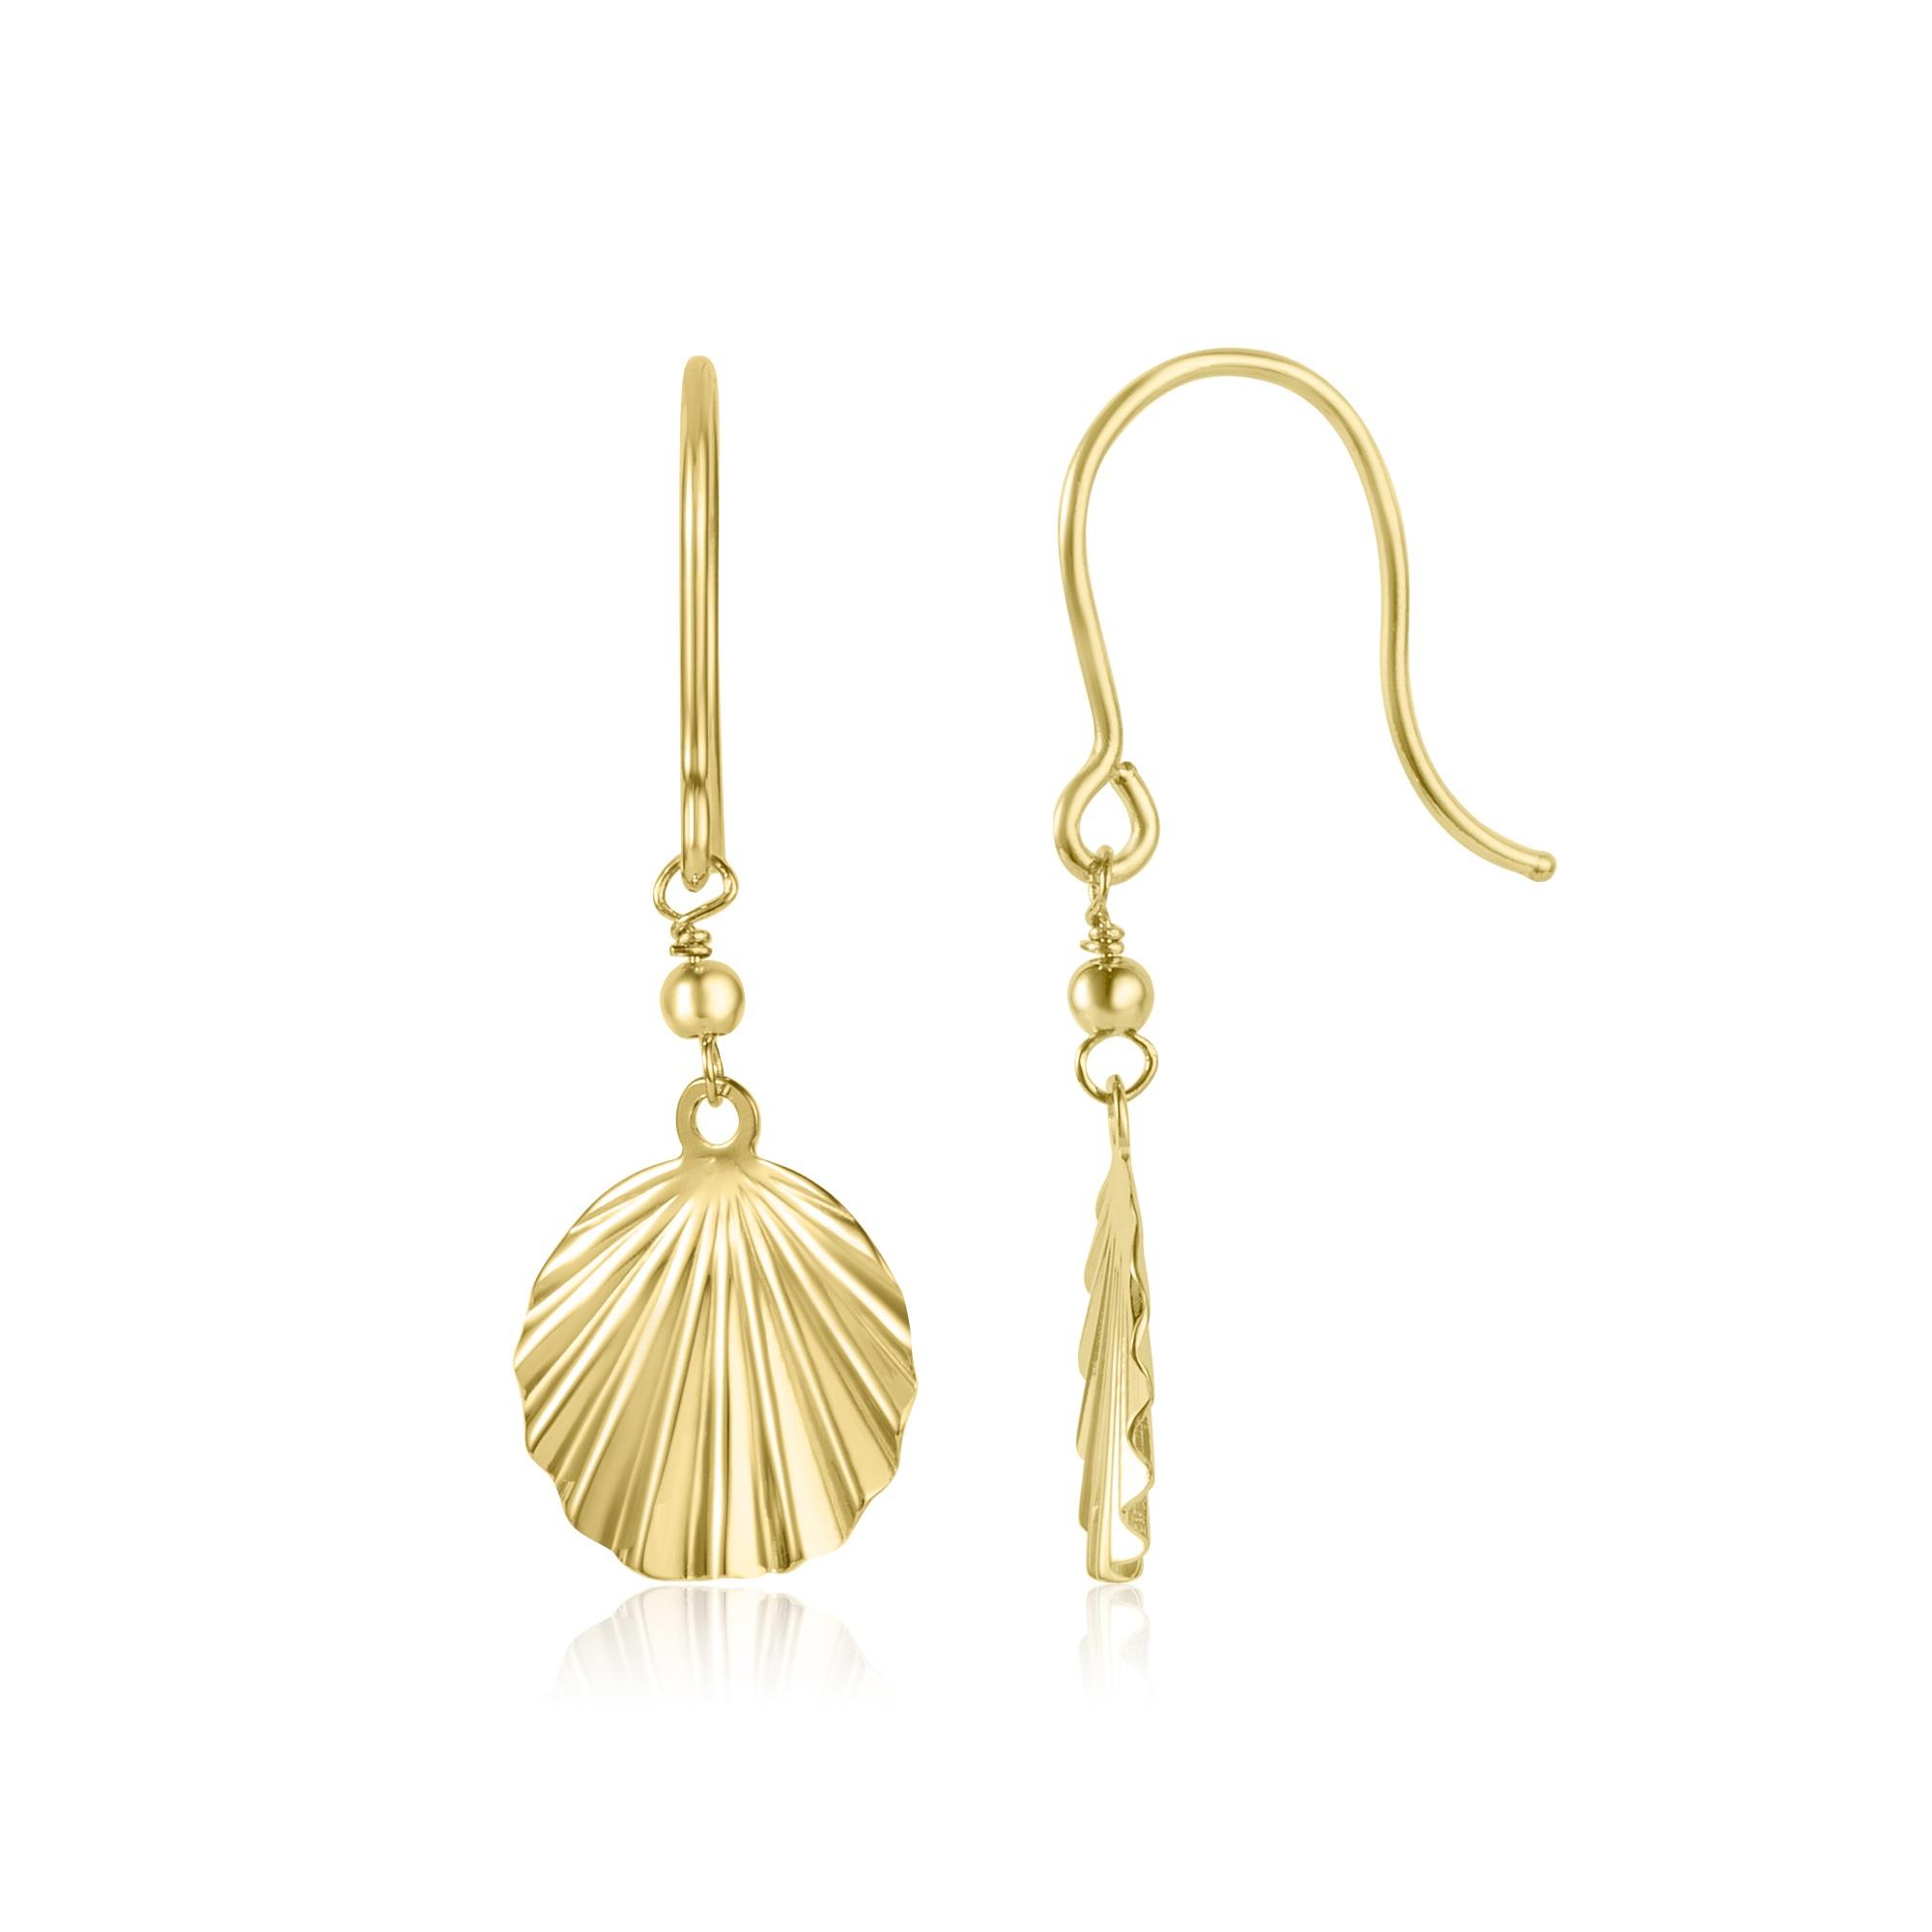 18ct Yellow Gold Shell Design Drop Earrings Pravins